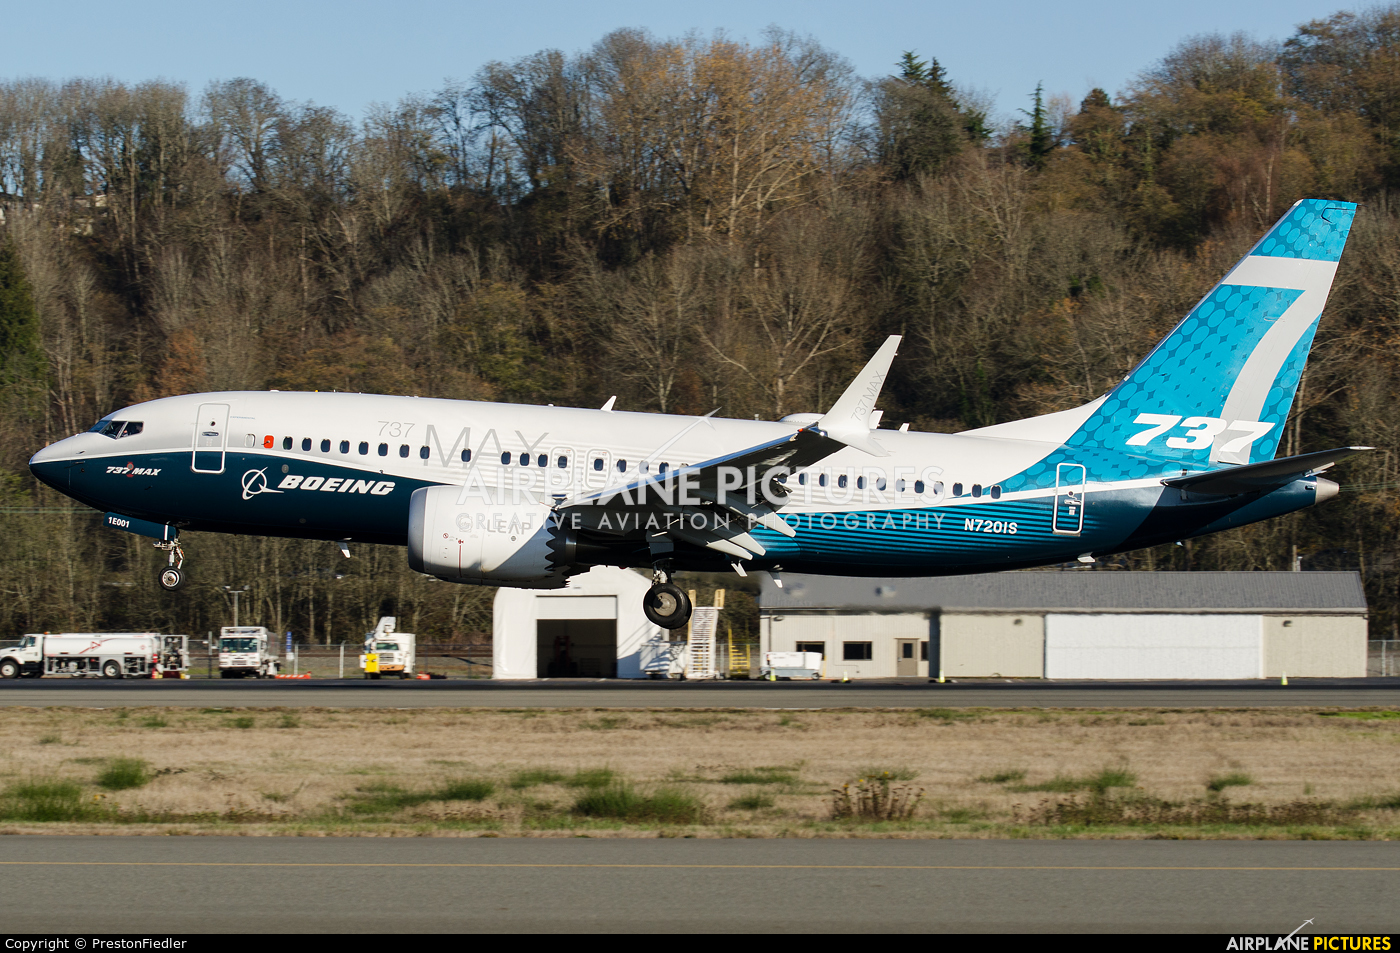 Boeing Company N7201S aircraft at Seattle - Boeing Field / King County Intl